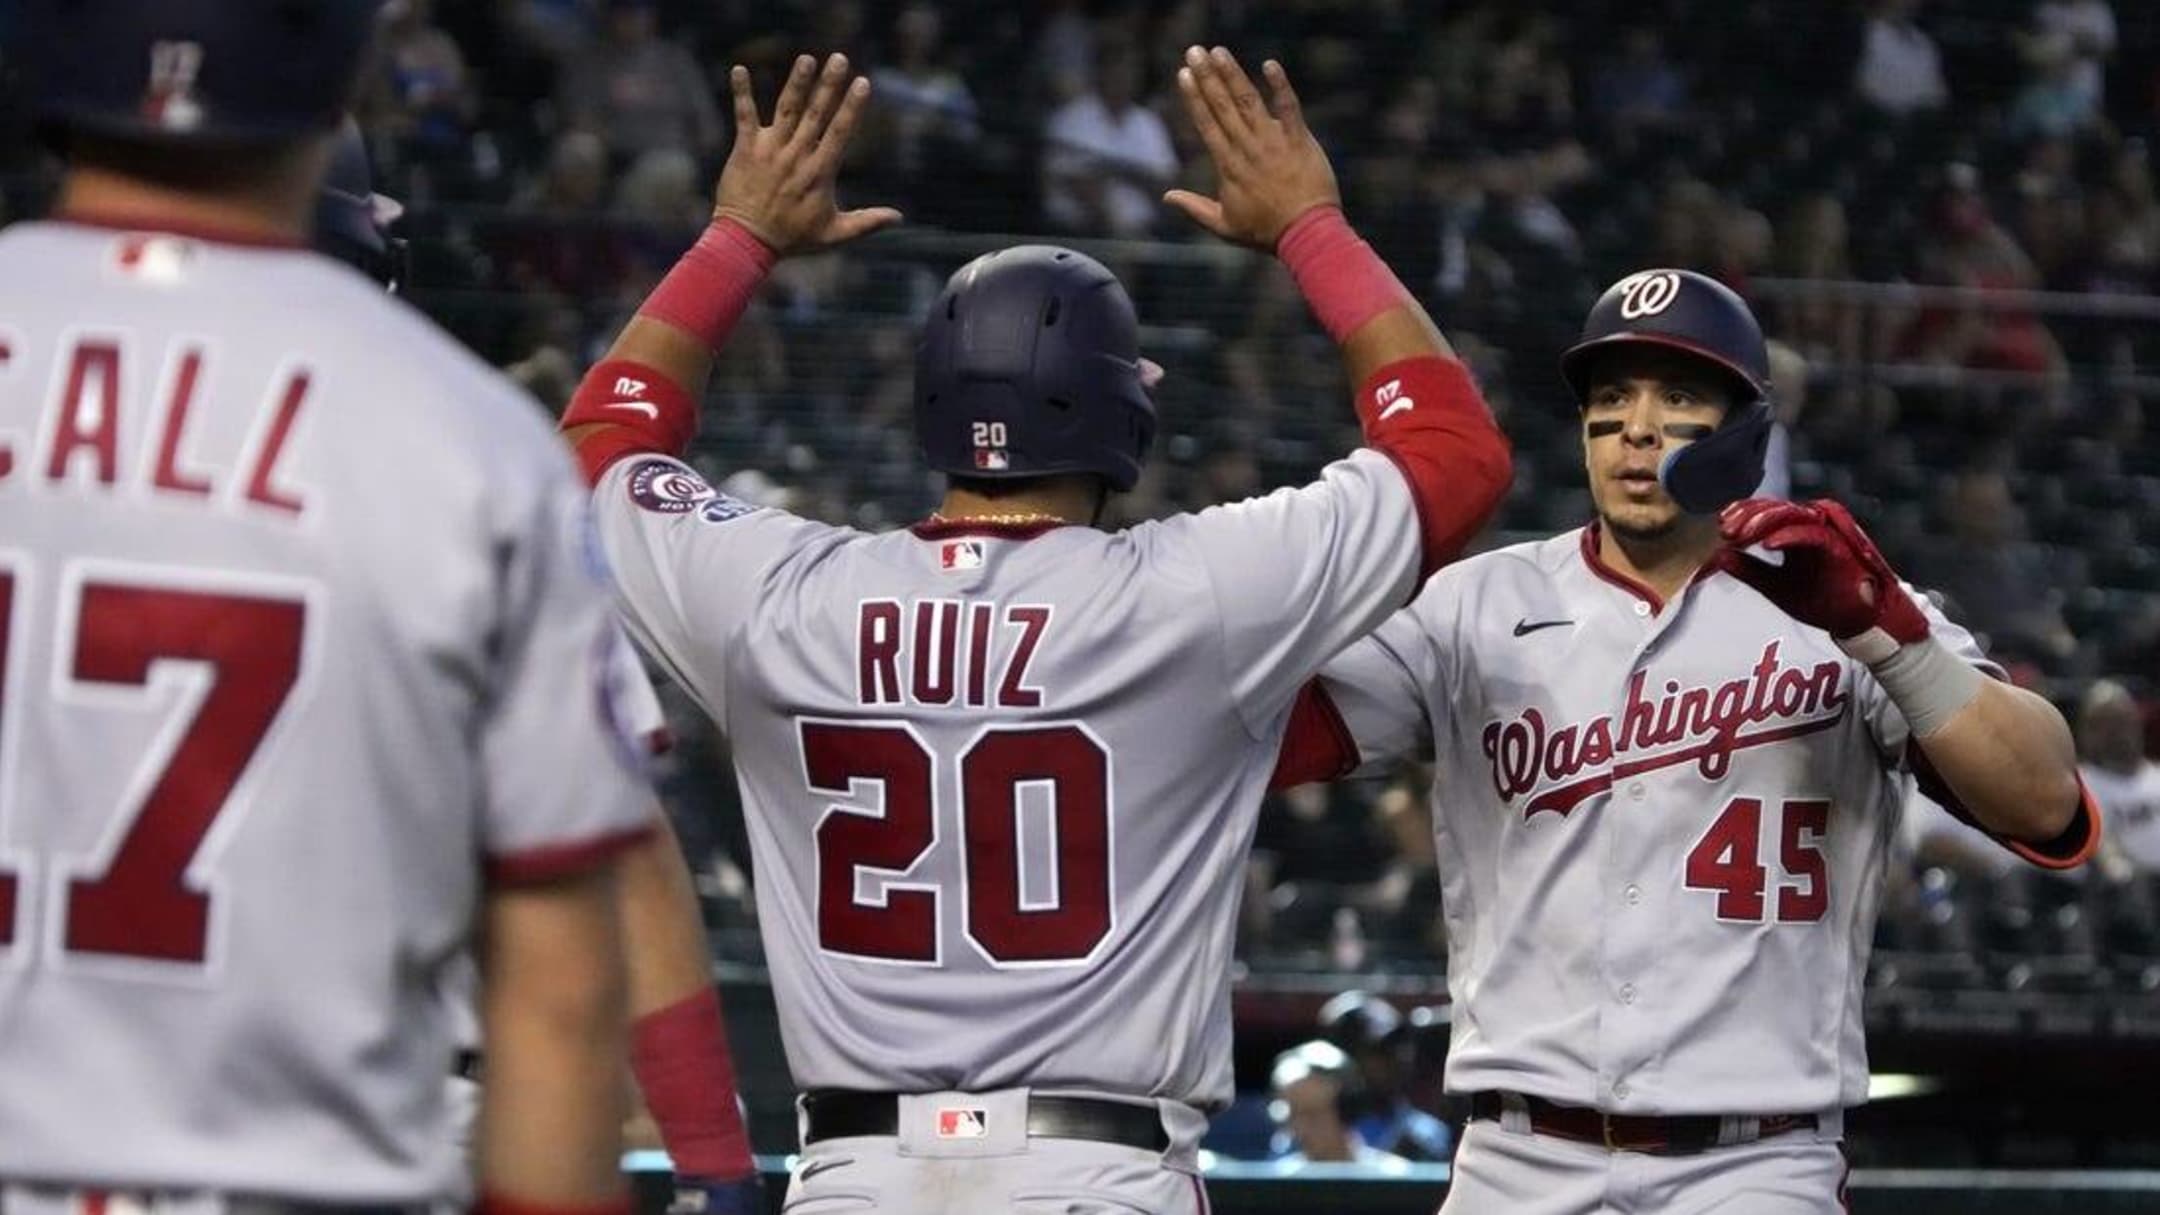 Joey Meneses homers, drives in 3 runs as the Nationals rally past